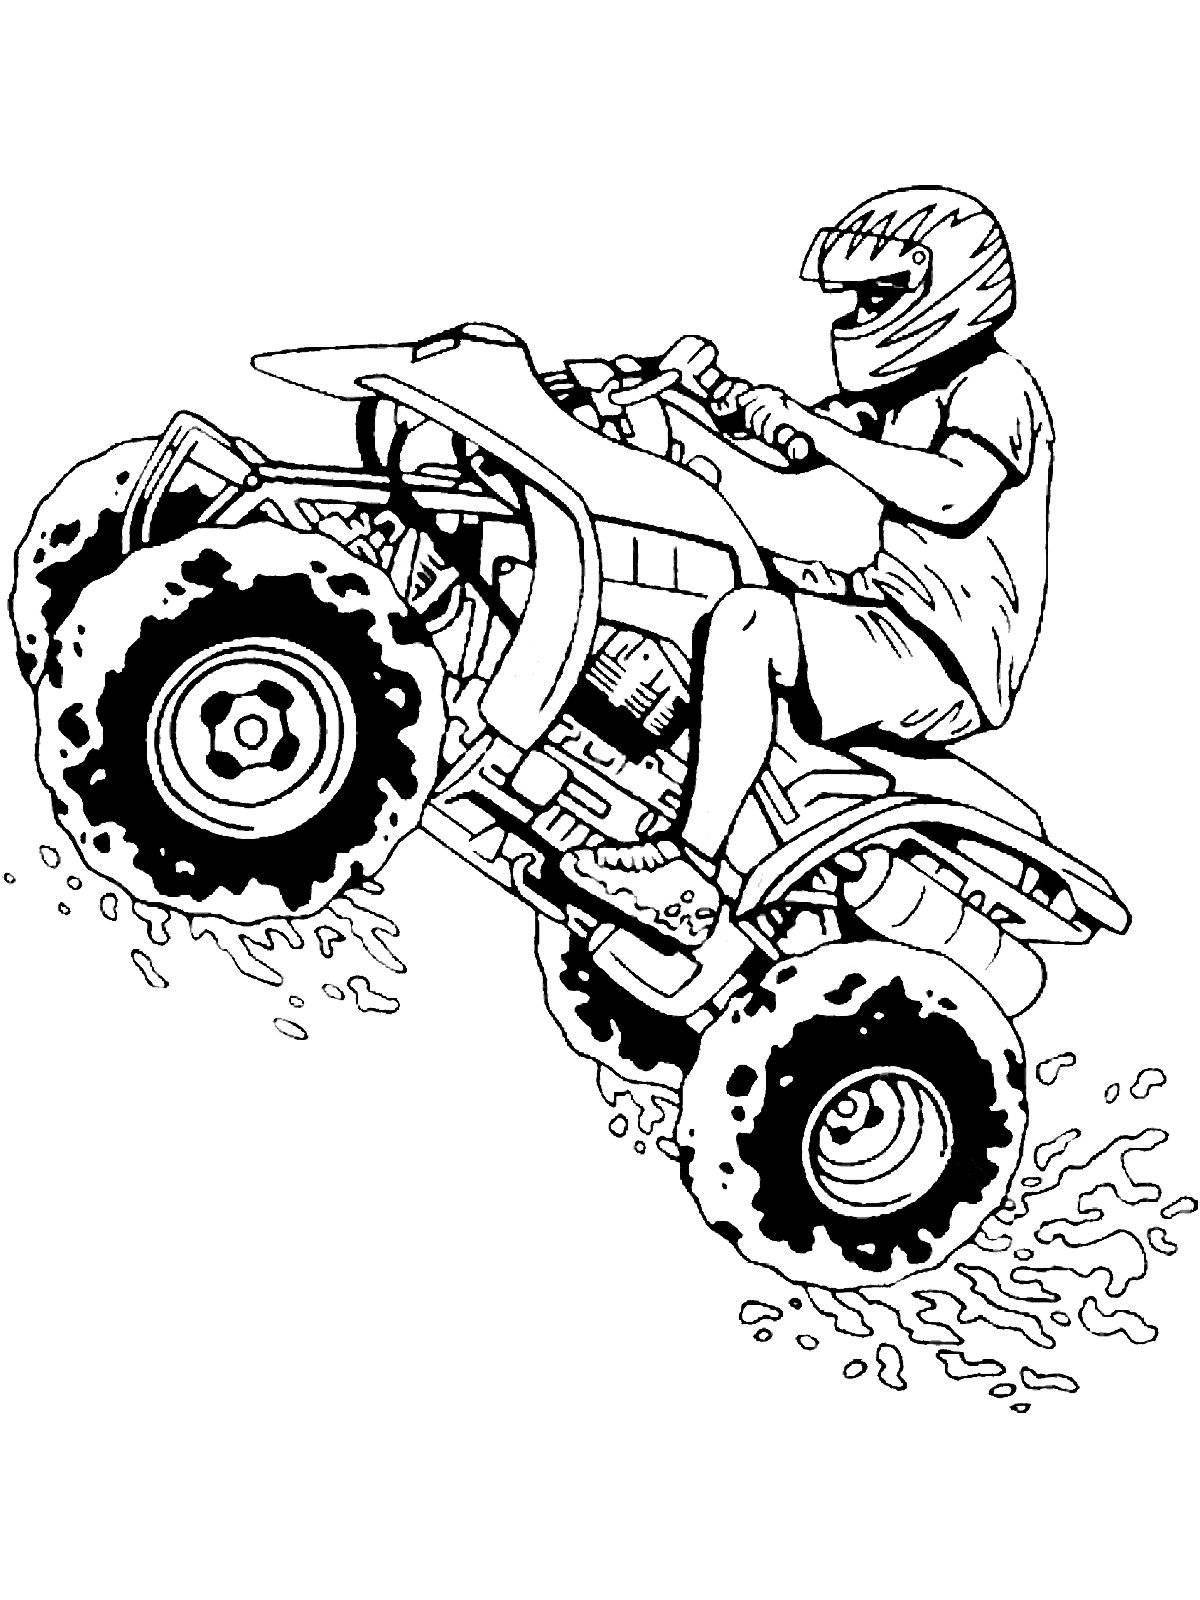 Incredible coloring book for kids on quad bikes